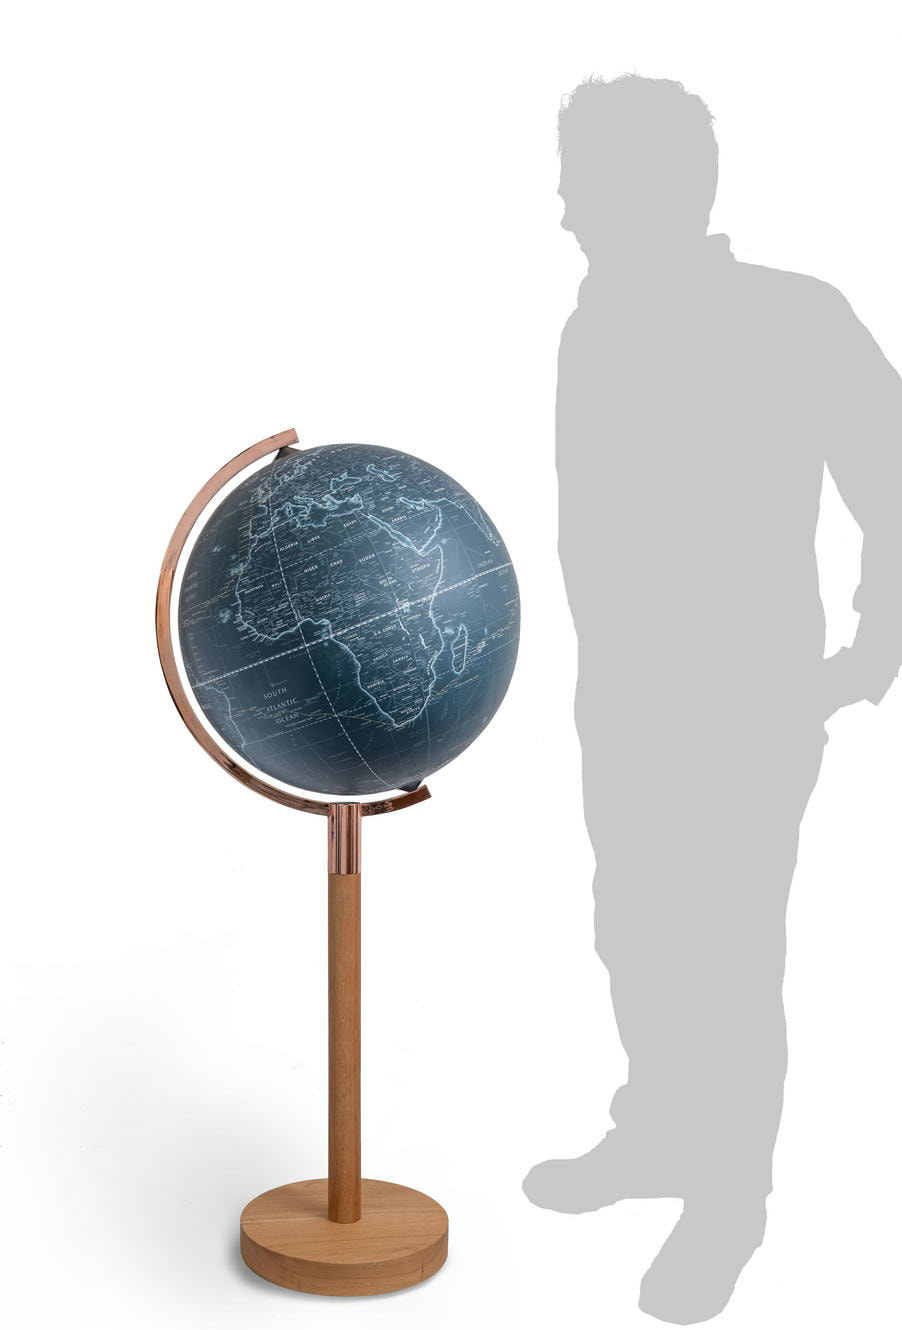 Floor standing globe with a wooden base next to a silhouette of Chris Adams